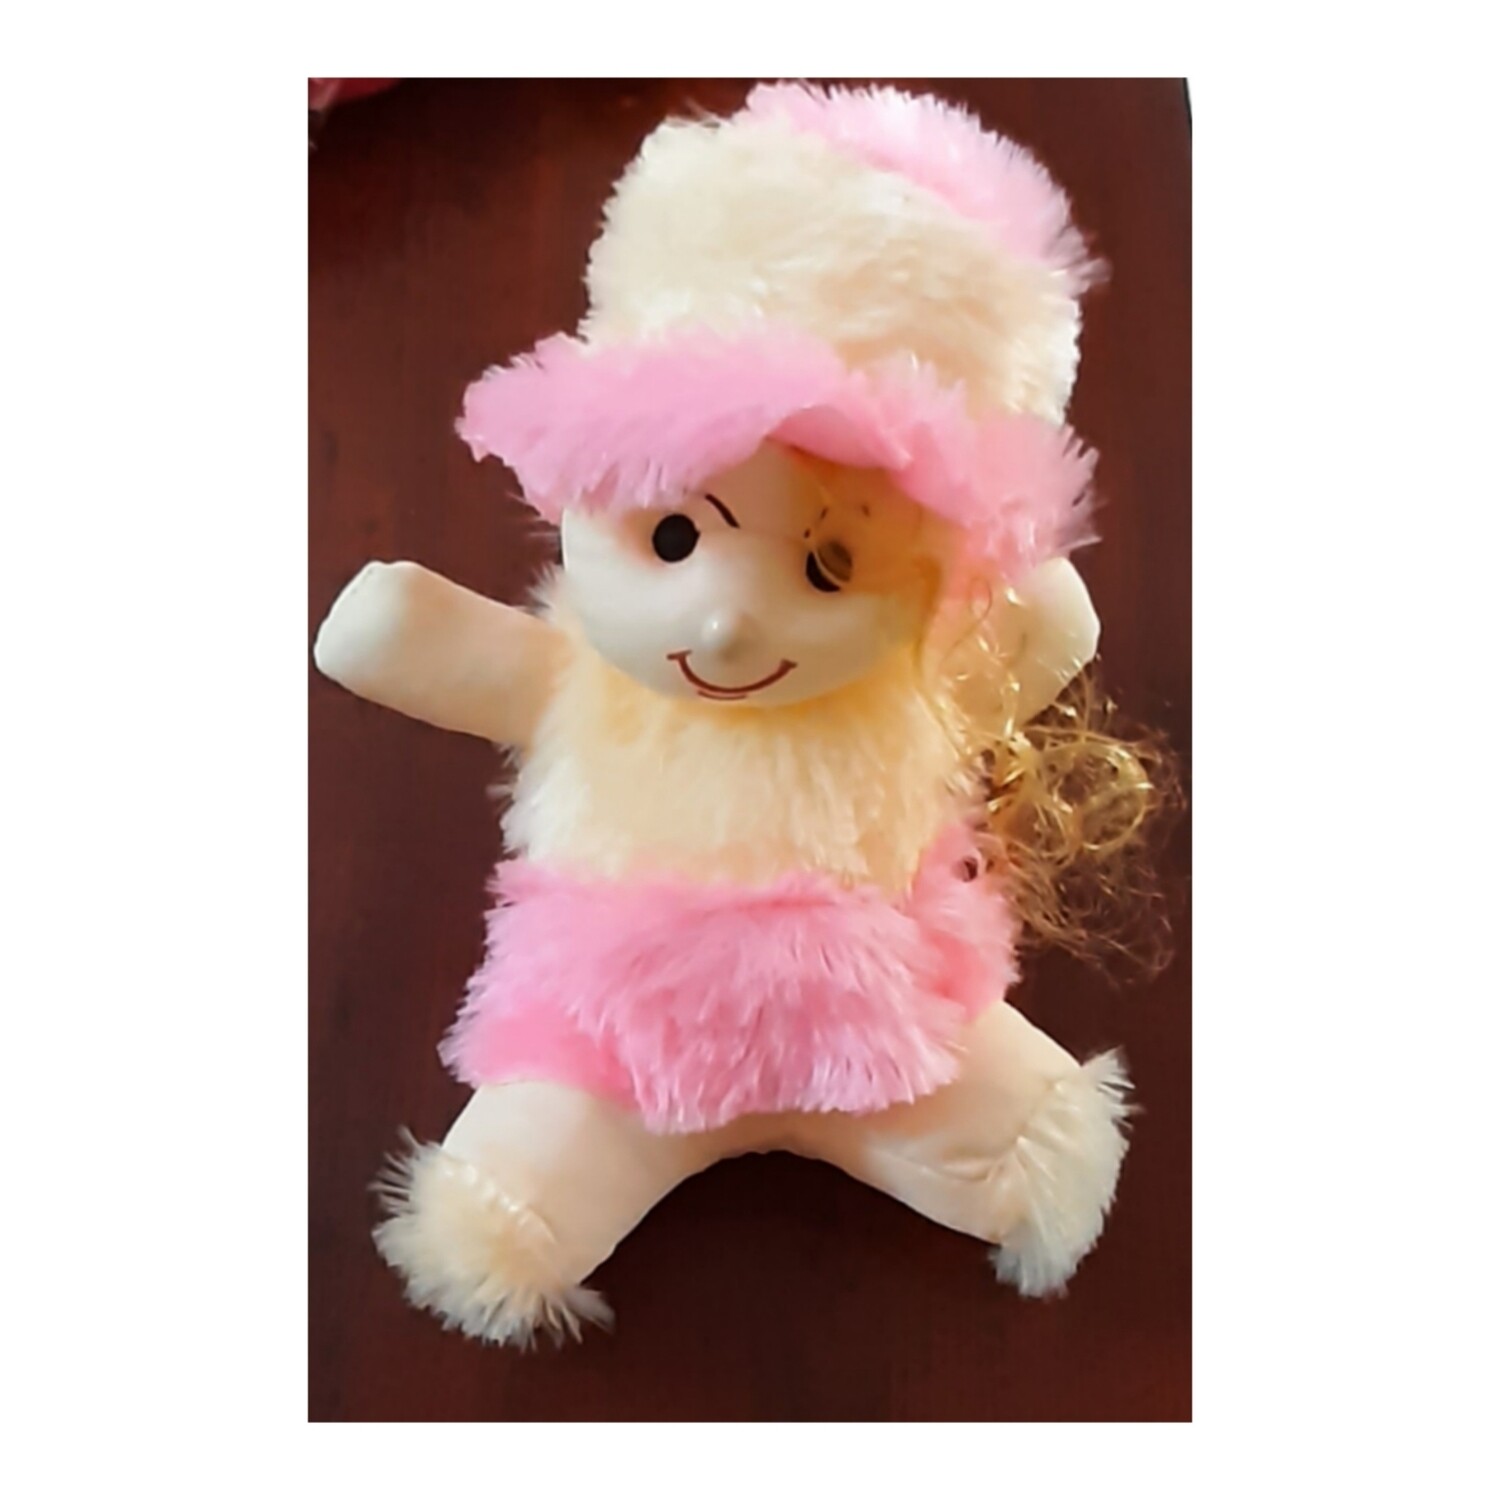 Soft Fluffy Cute Baby Doll Toy for Kids - Pink & Cream Colour